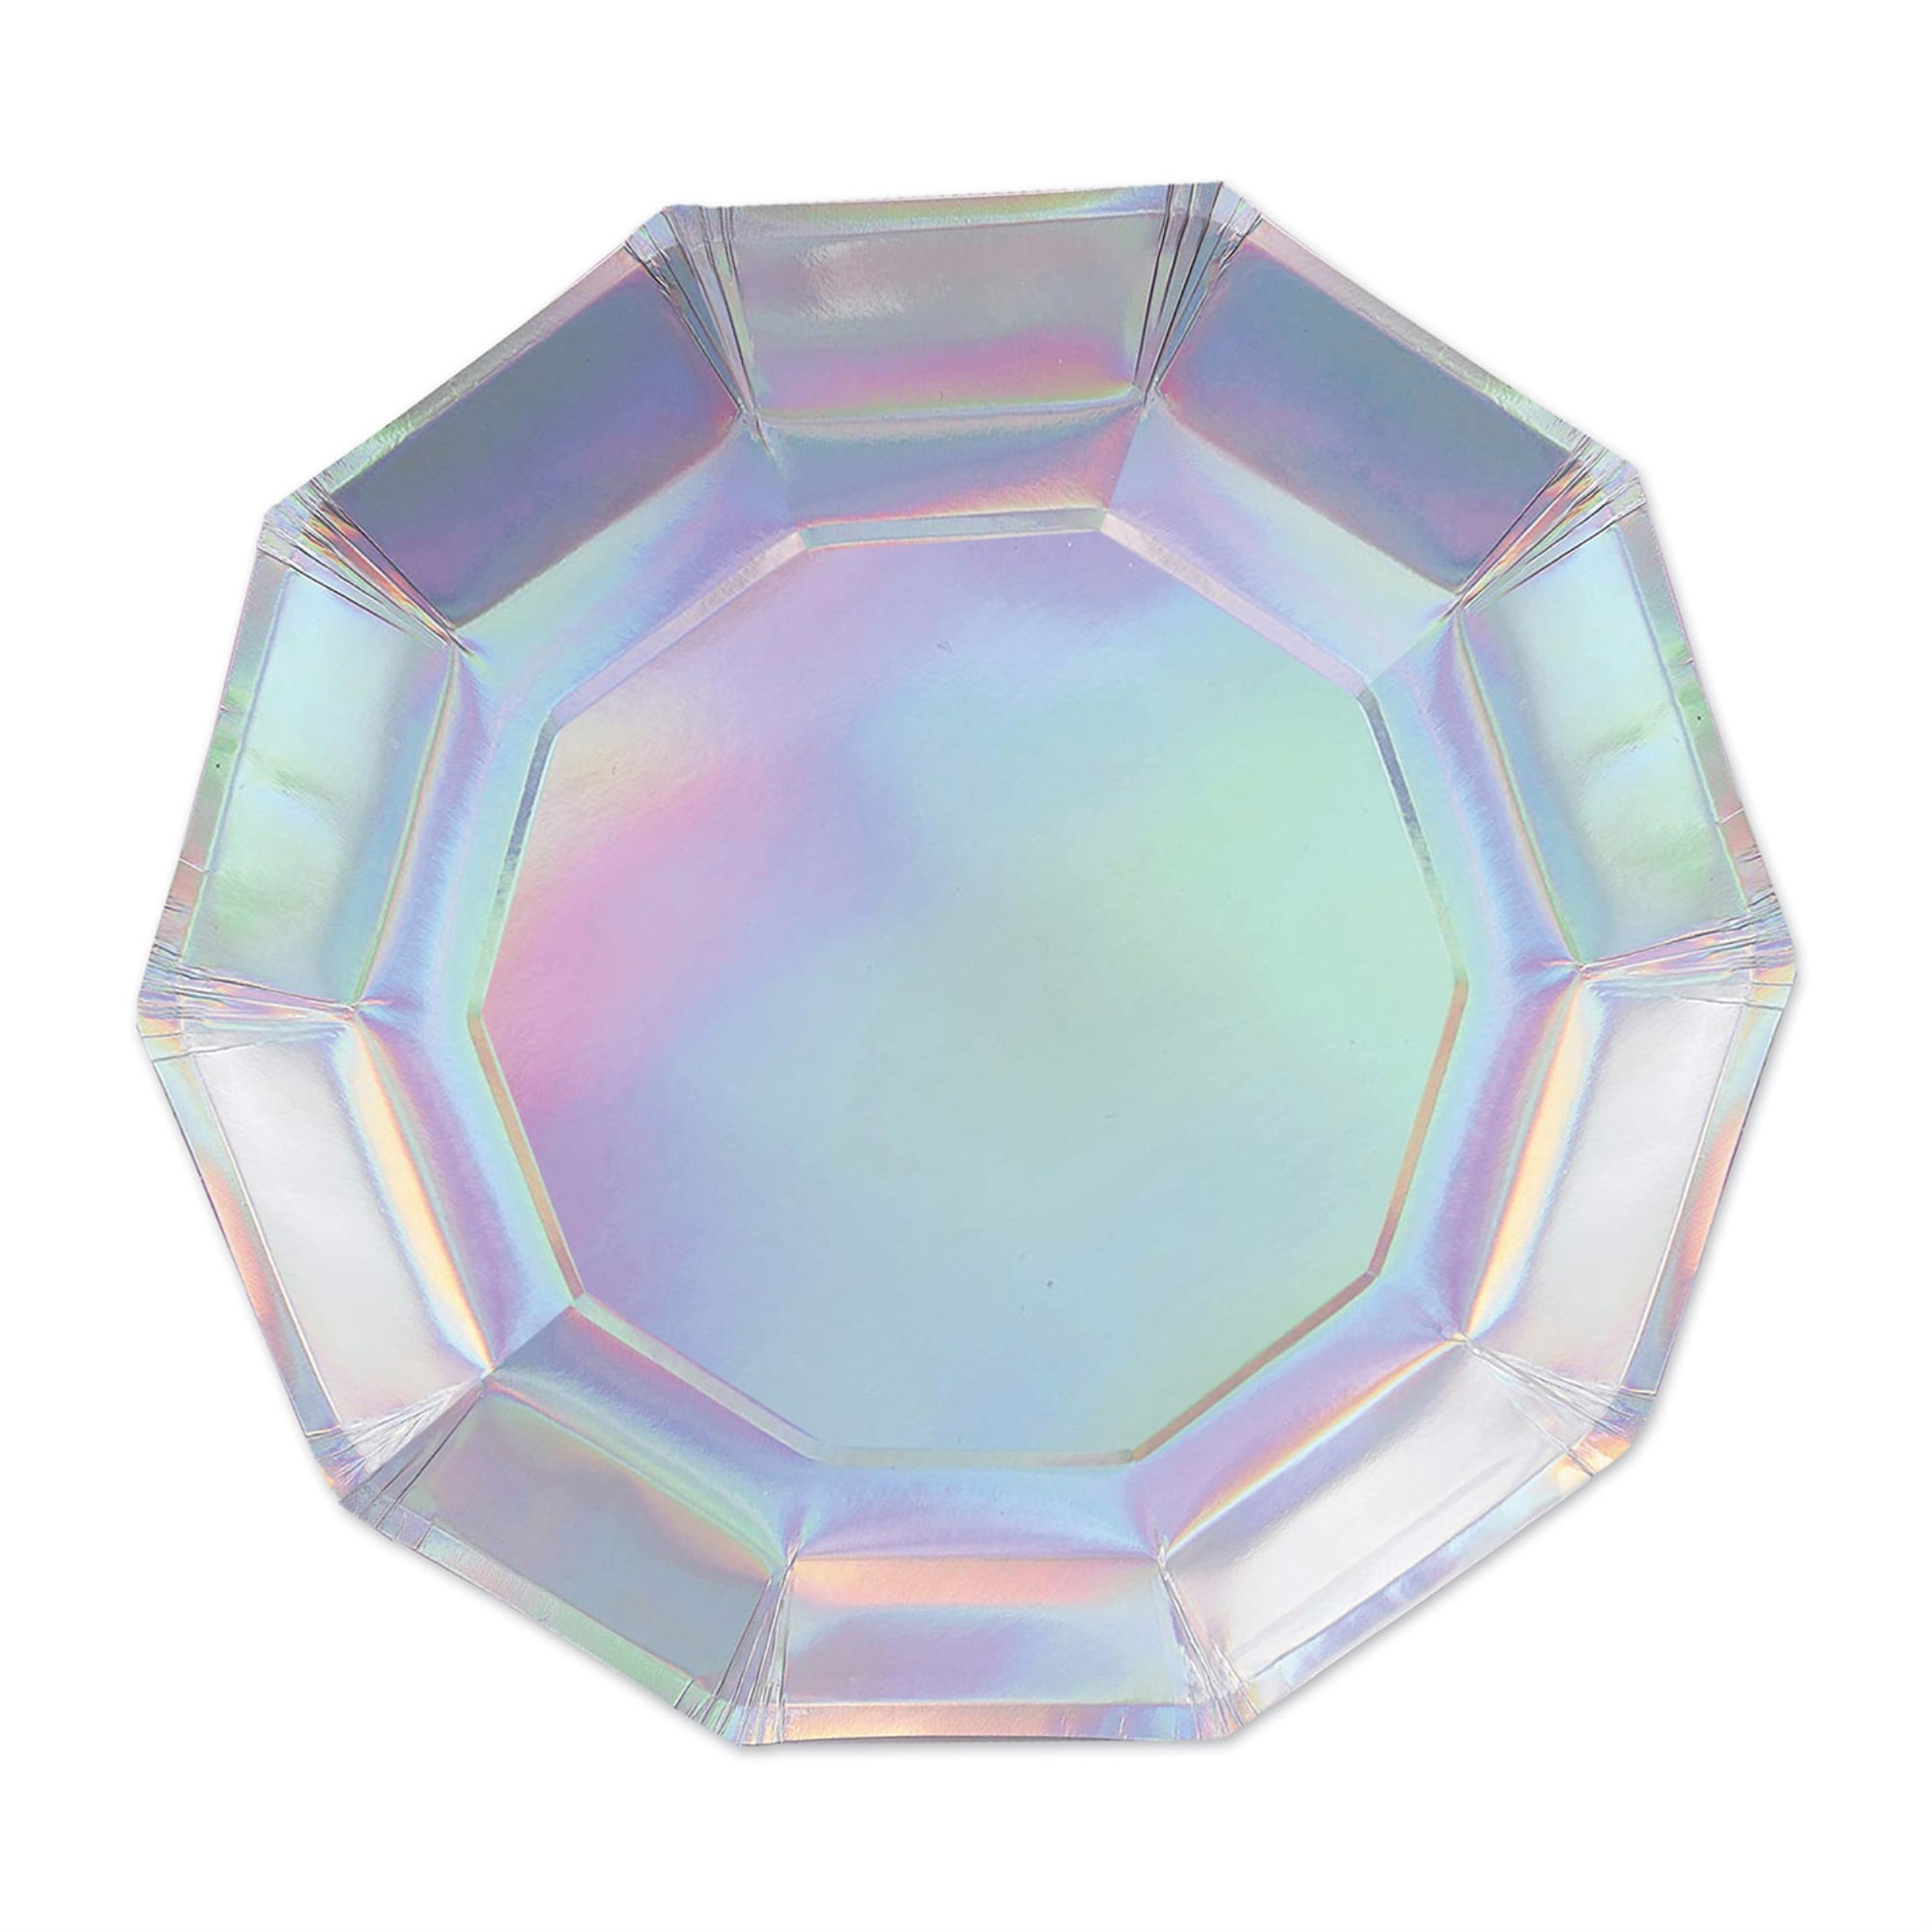 Picture of Beistle 53571 7 in. Iridescent Decagon Plates - Pack of 12